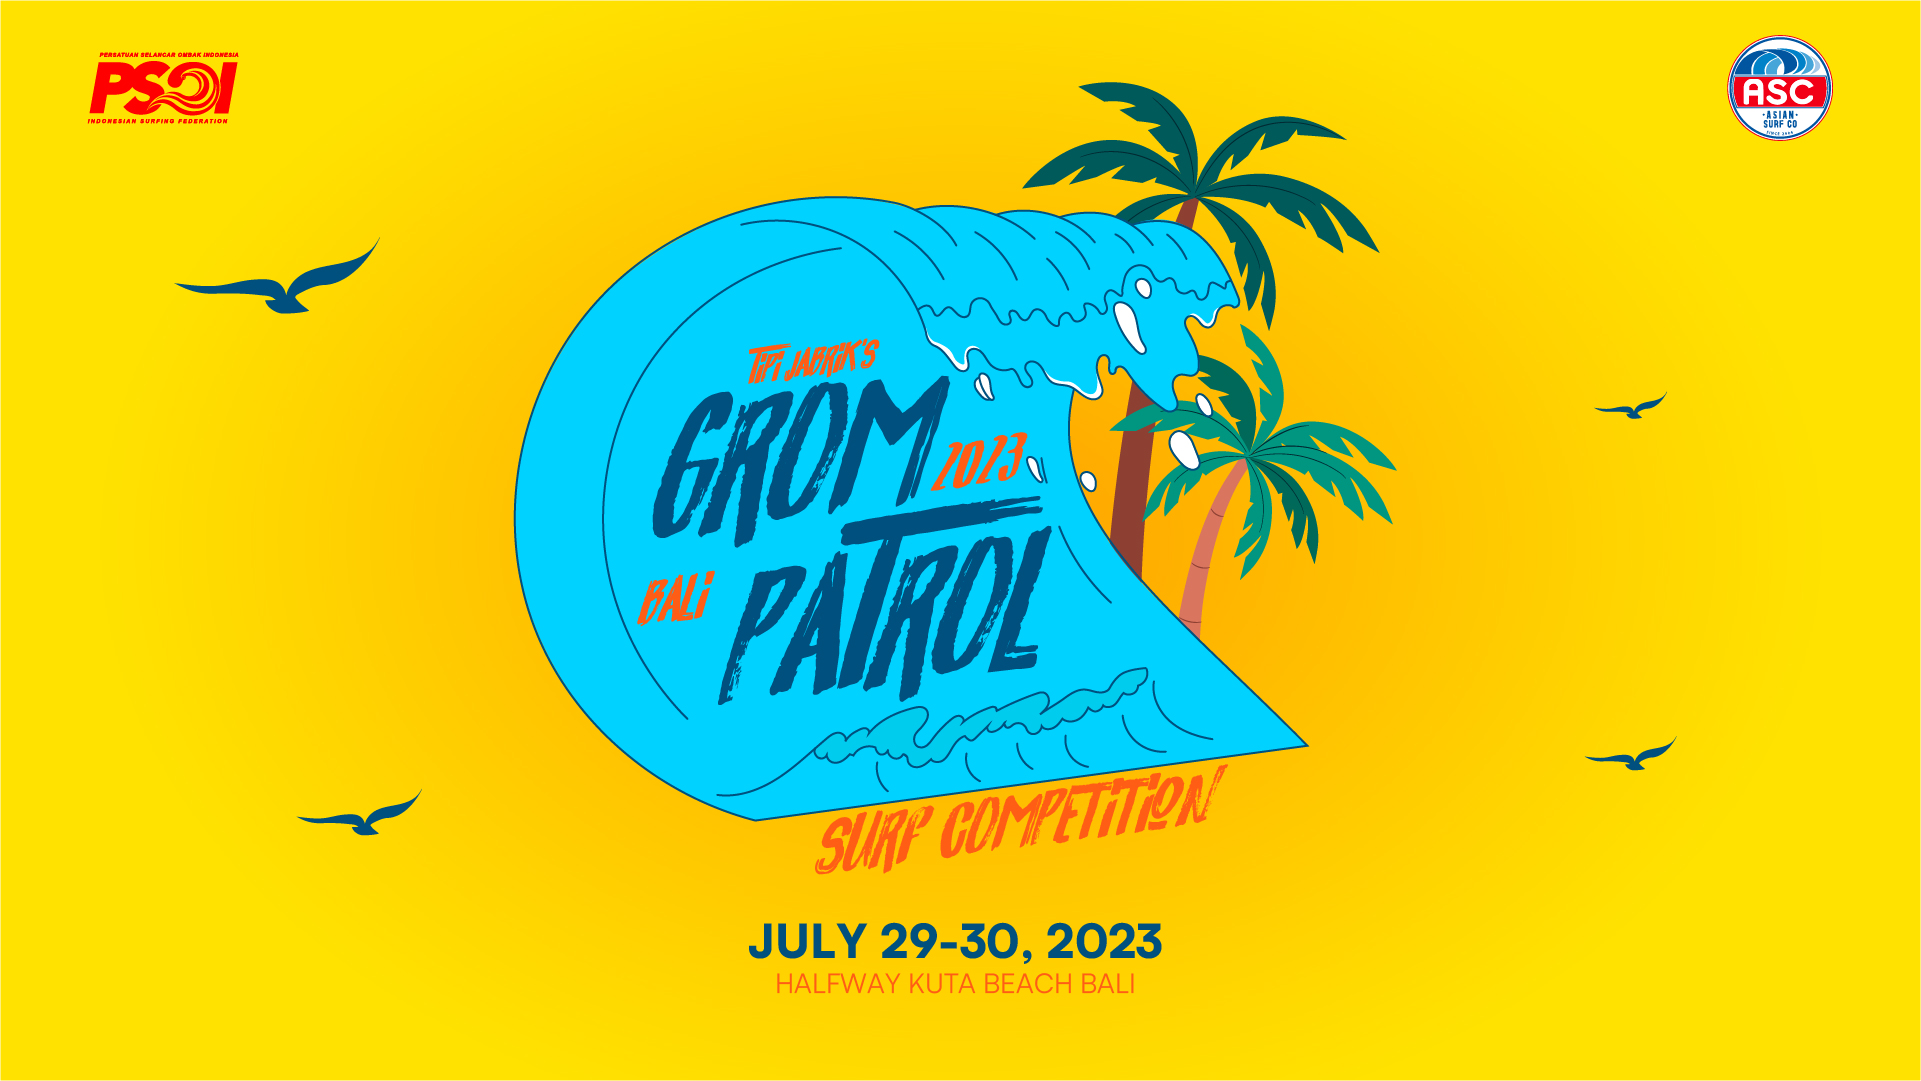 GROM PATROL 2023 SURF COMPETITION